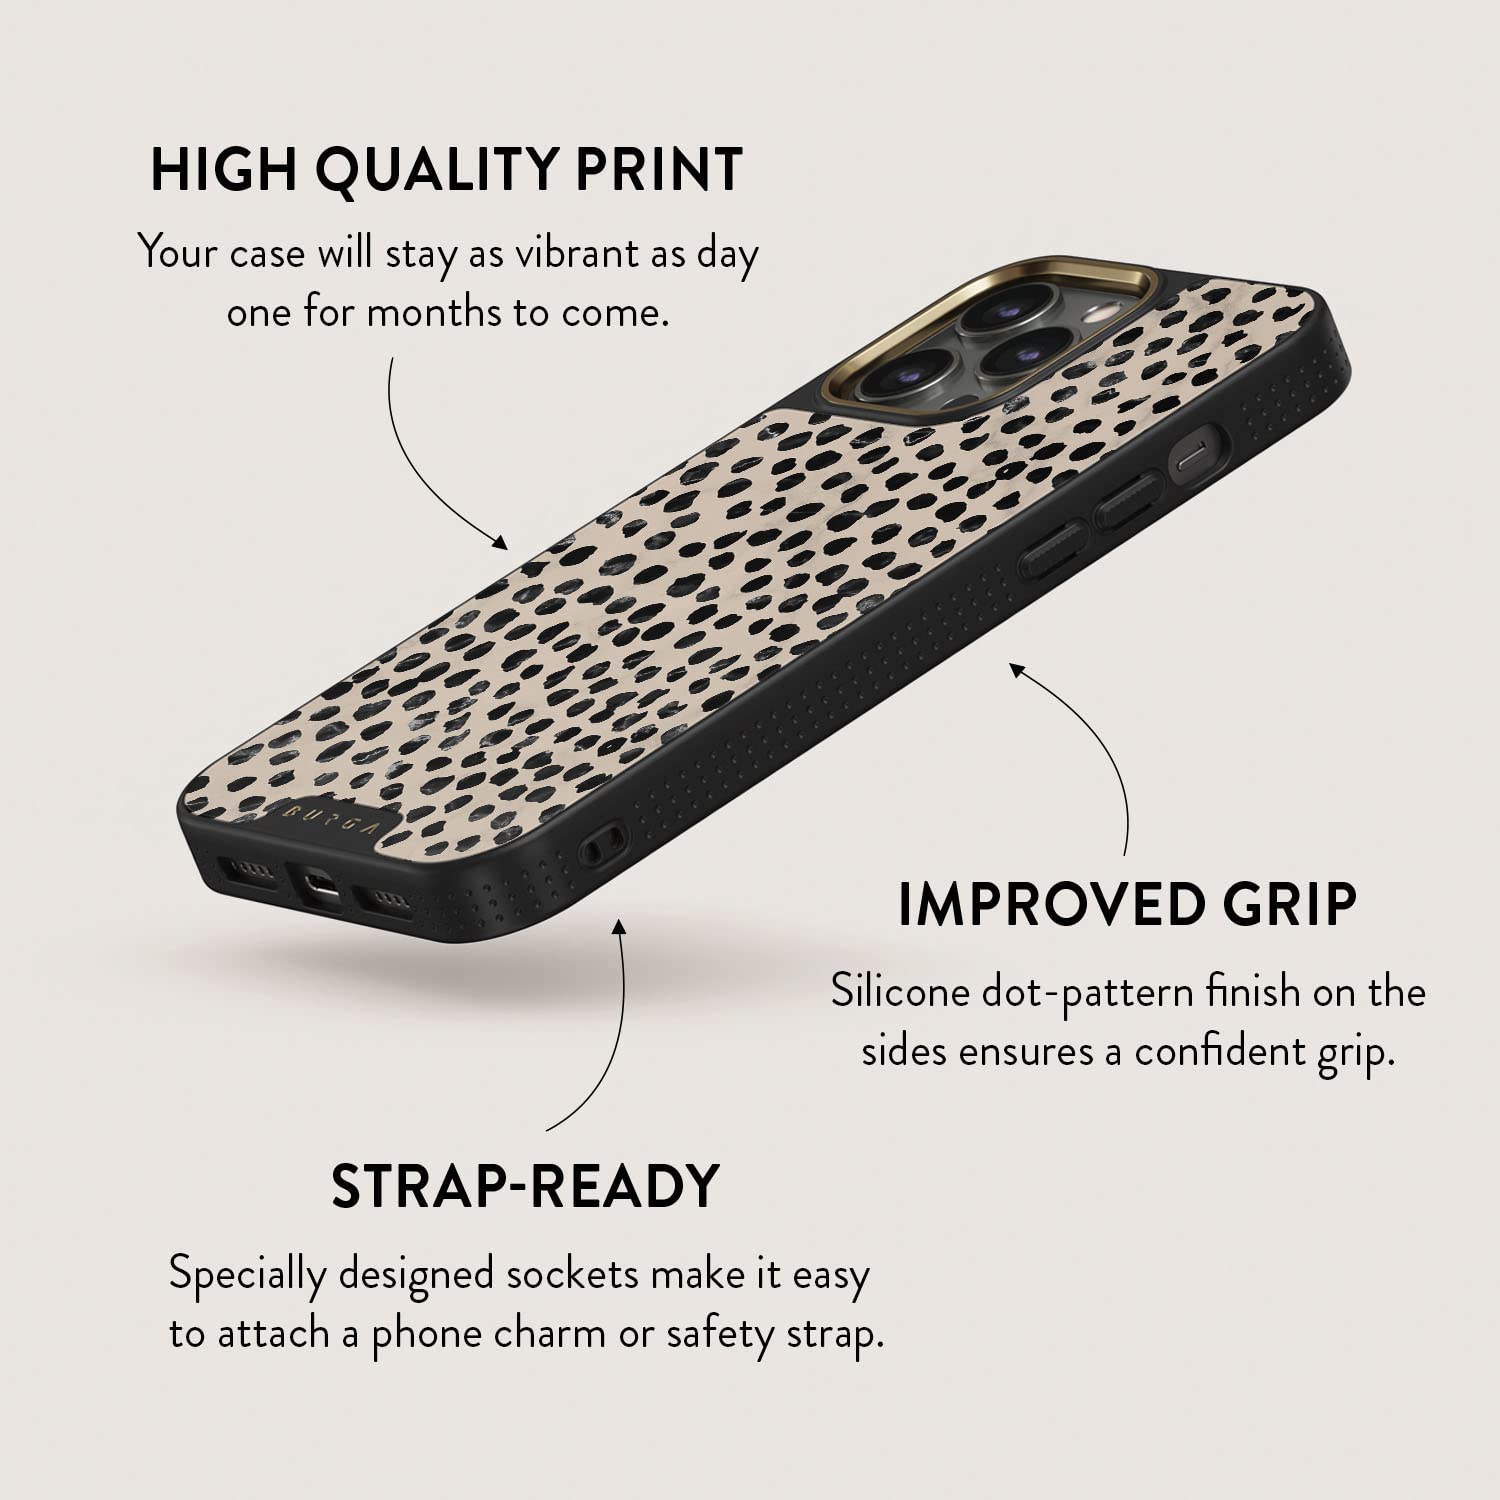 BURGA Phone Case Compatible with iPhone 13 PRO MAX - Black Polka Dots Pattern - Cute But Tough with CloudGuard 2-in-1 Defense System - Luxury iPhone 13 PRO MAX Protective Scratch-Resistant Hard Case